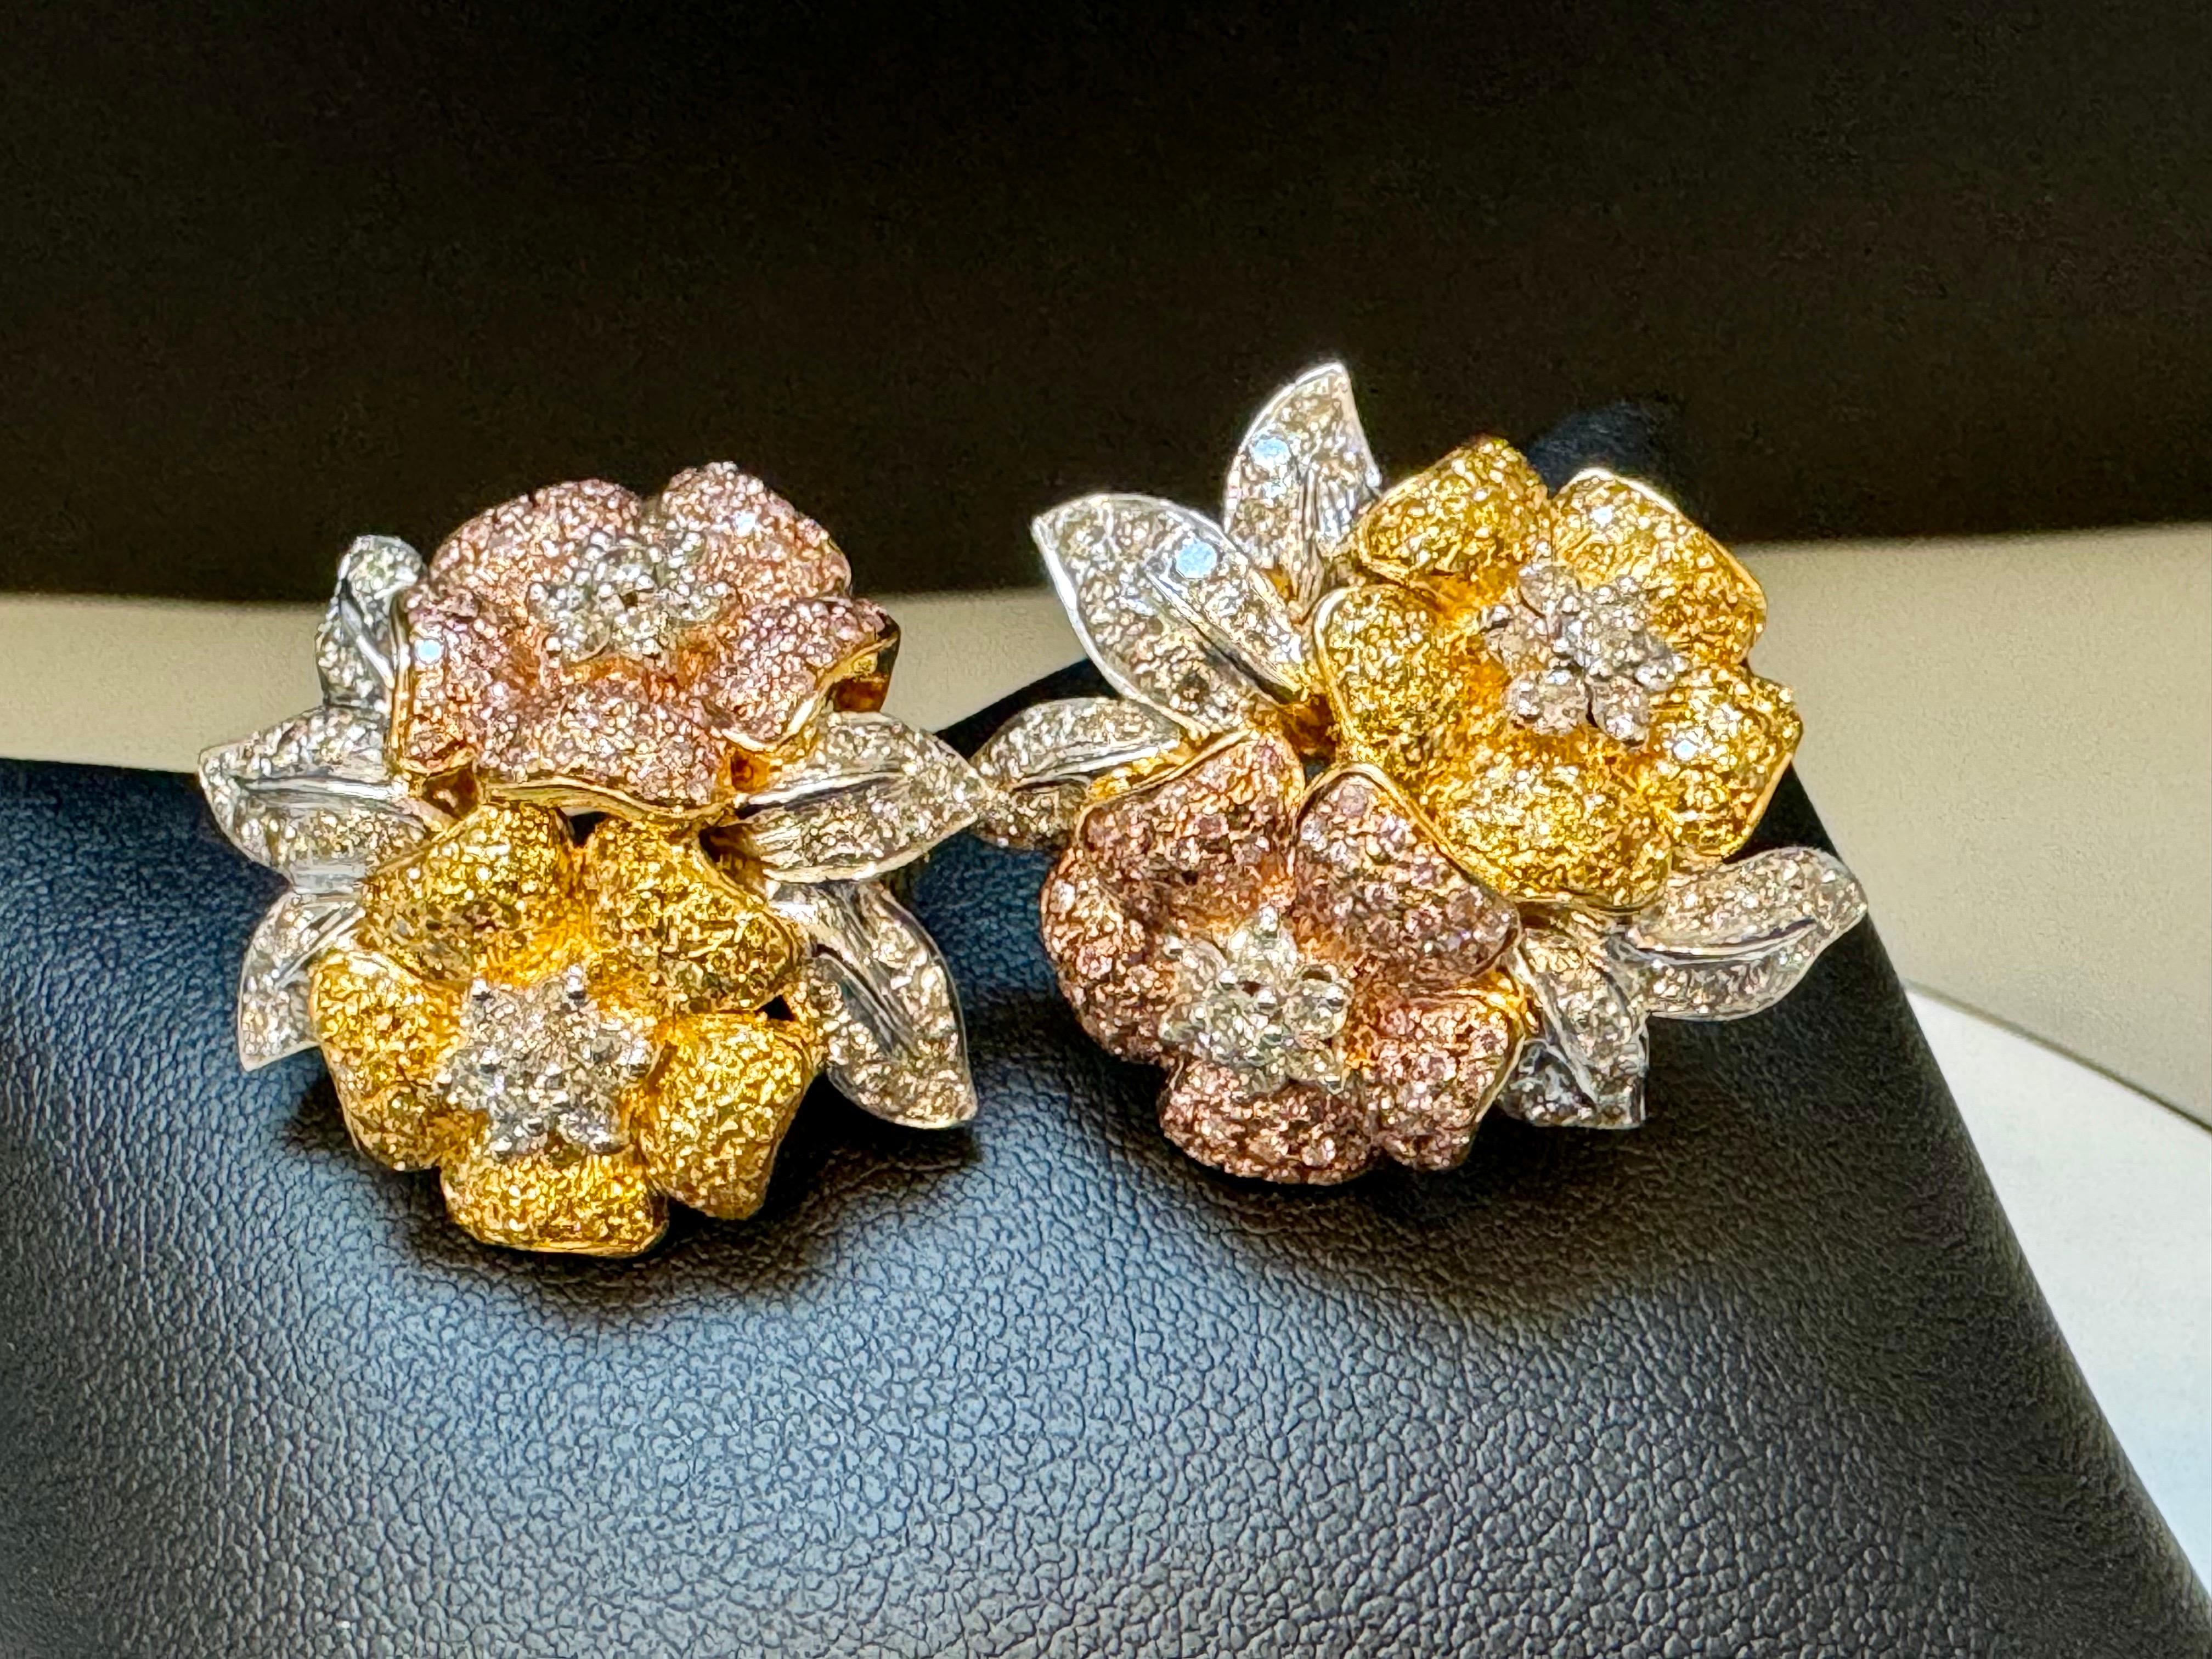 4.4 Ct Natural Fancy Color Diamond Flower Earrings in 18 Kt Multi Color Gold 
Approximately 4.4 Ct Natural  Fancy diamonds are making beautiful petals of flower which has a  diamond  Flower in the center.
It has all colors of gold , Yellow , White